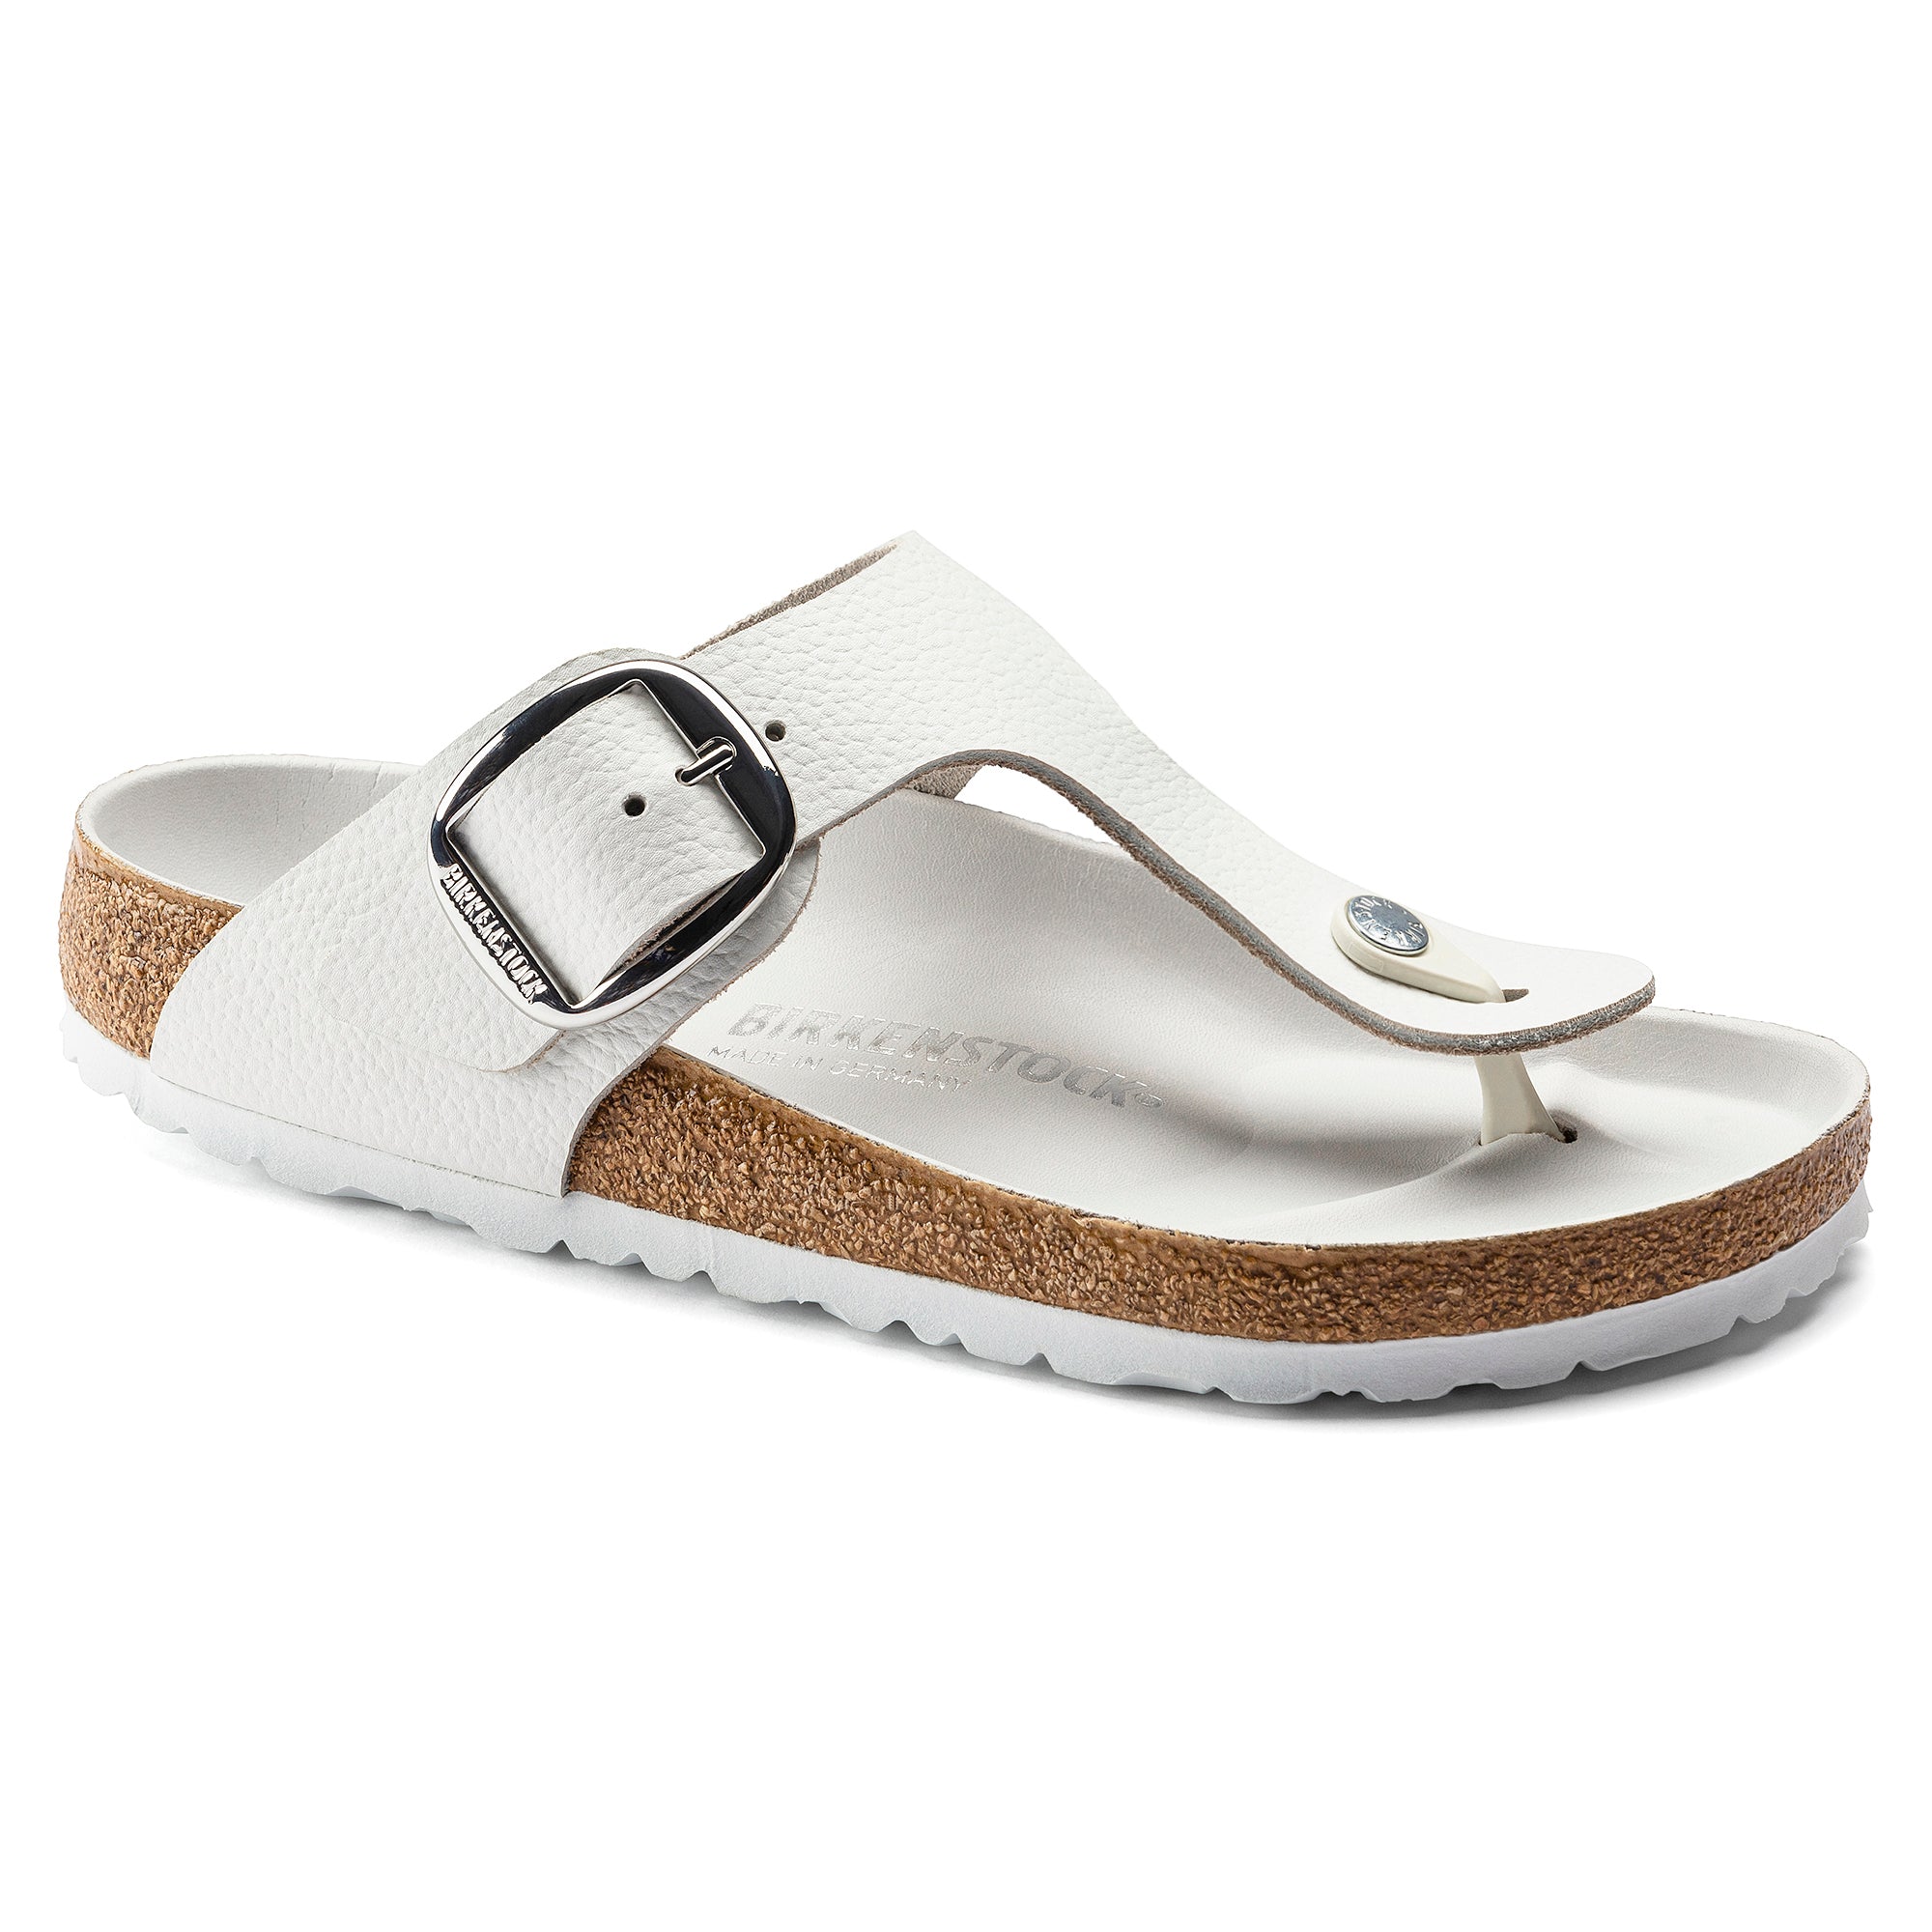 Birkenstock Limited Edition Gizeh Big Buckle white leather